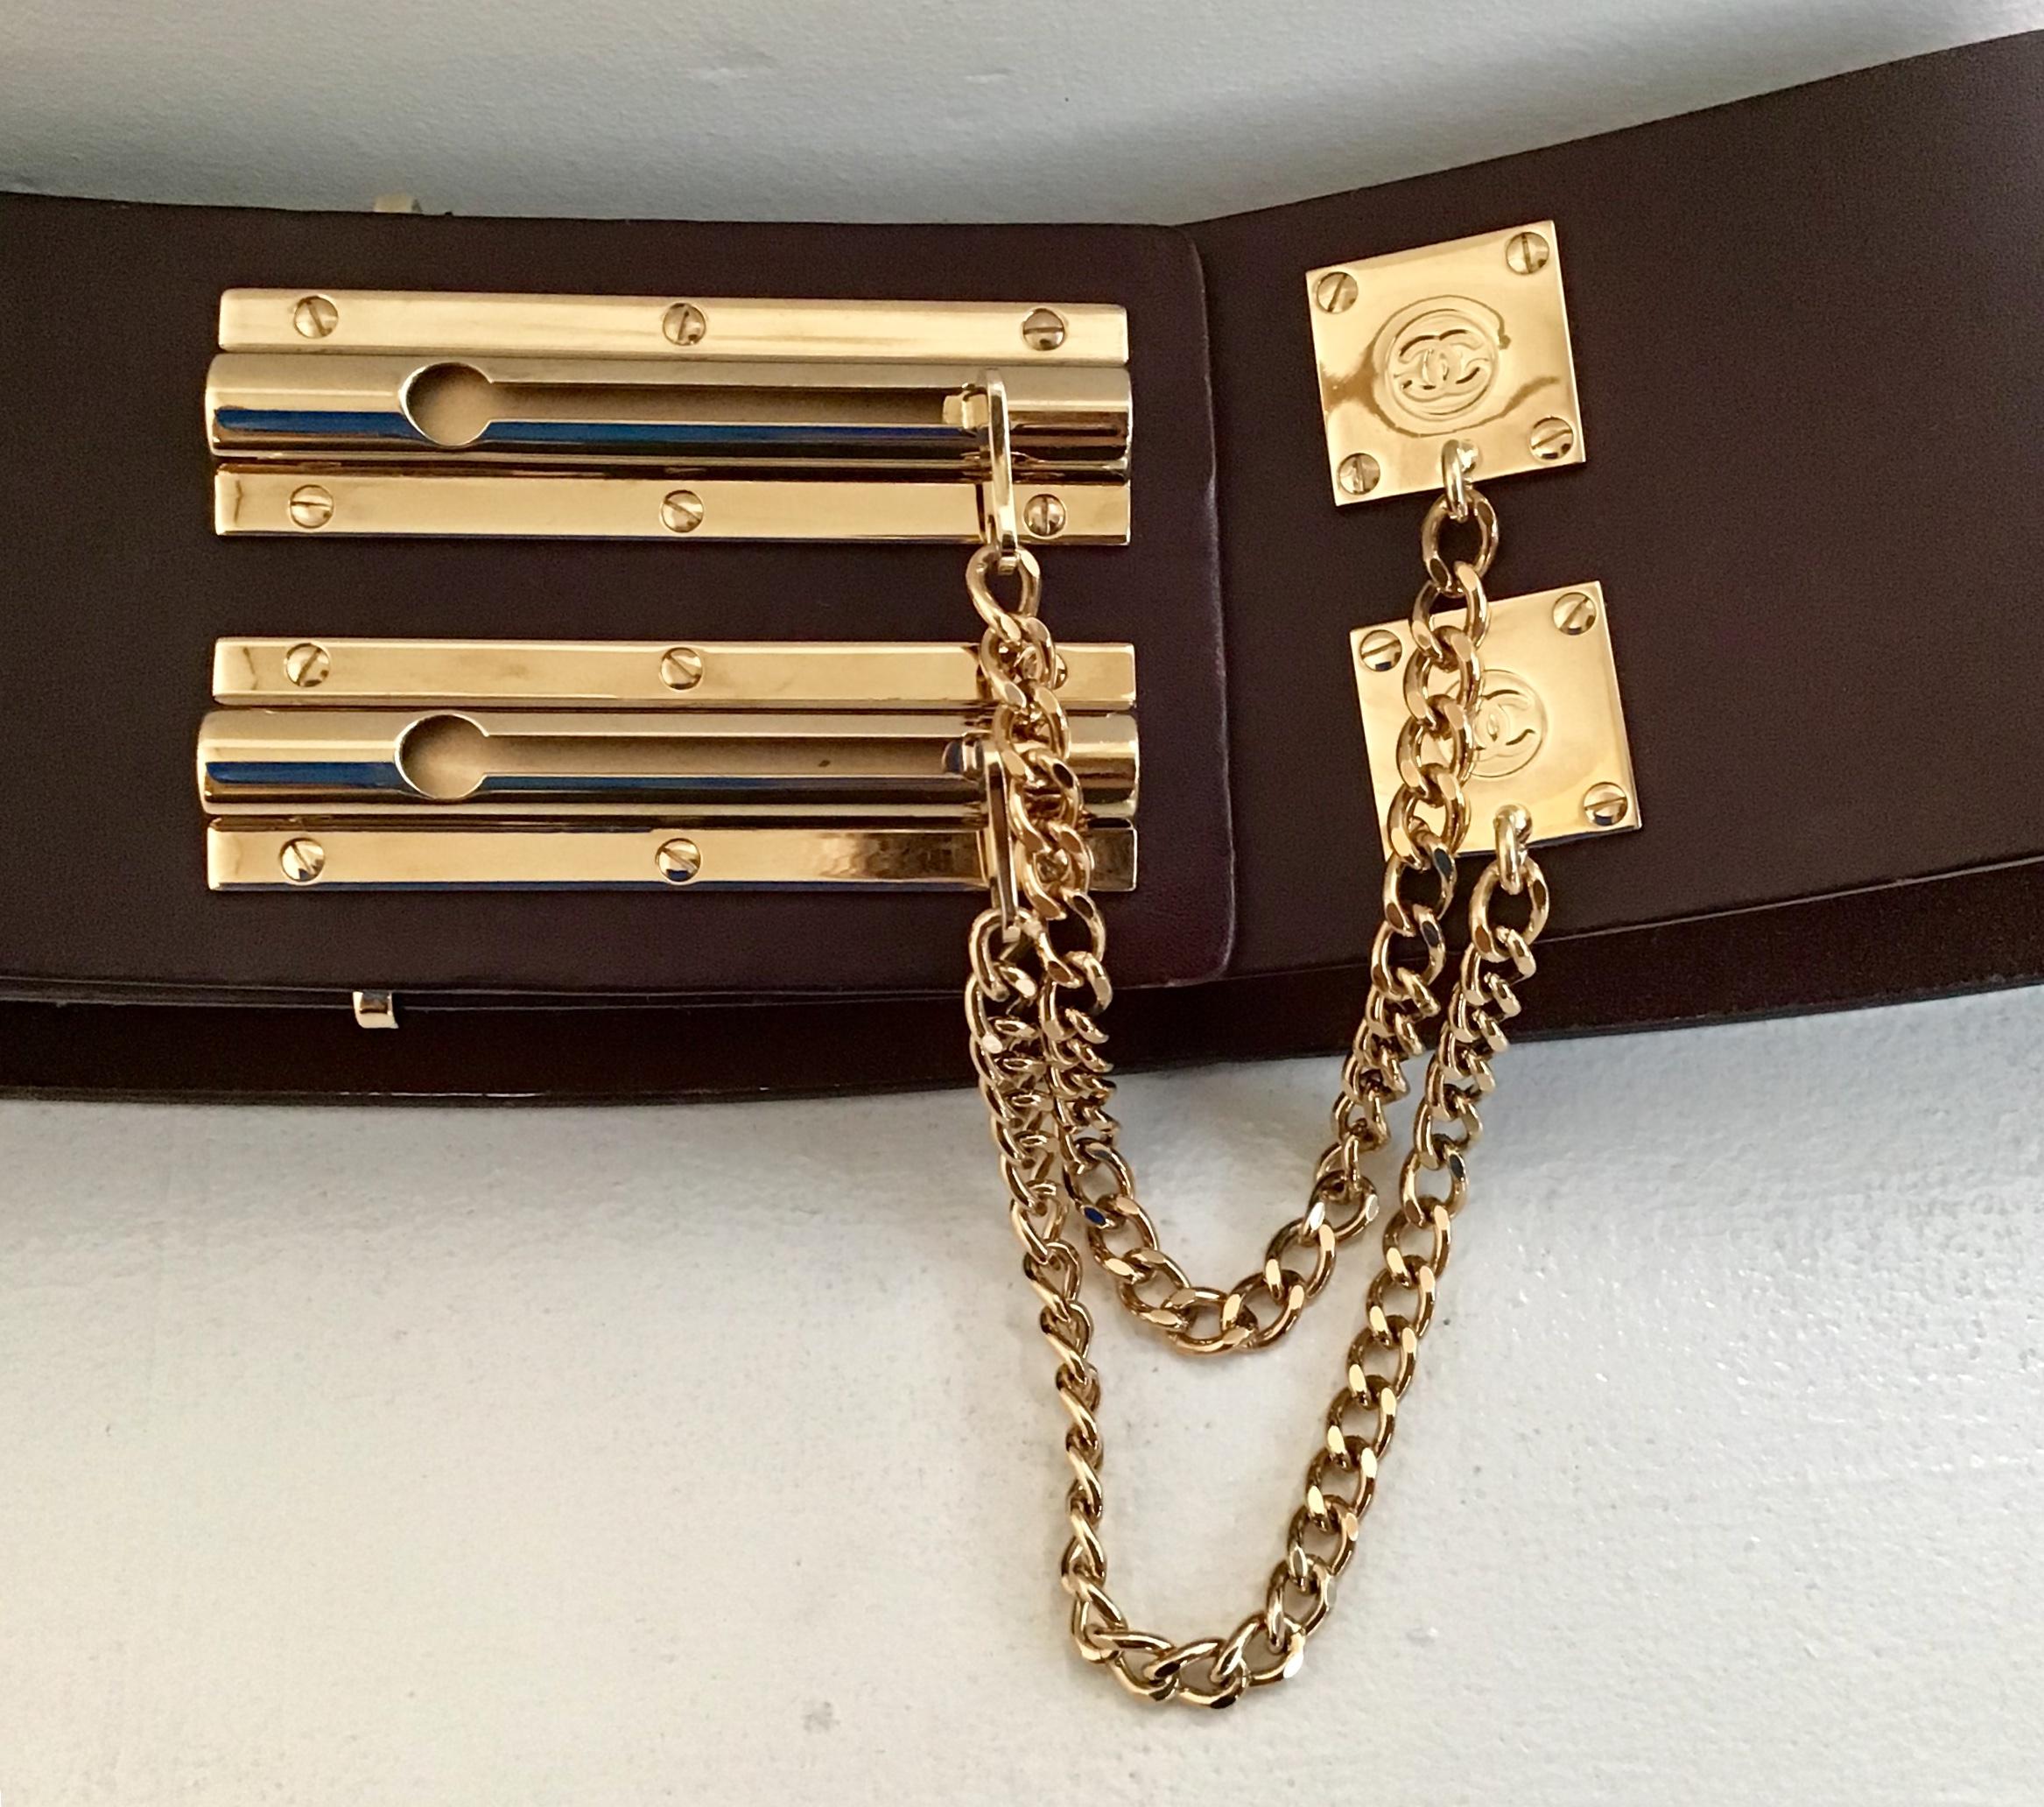 Chanel Brown Leather Sliding Chain Lock Belt. Featuring two gold toned sliding chain locks with Chanel logo. Size 38.